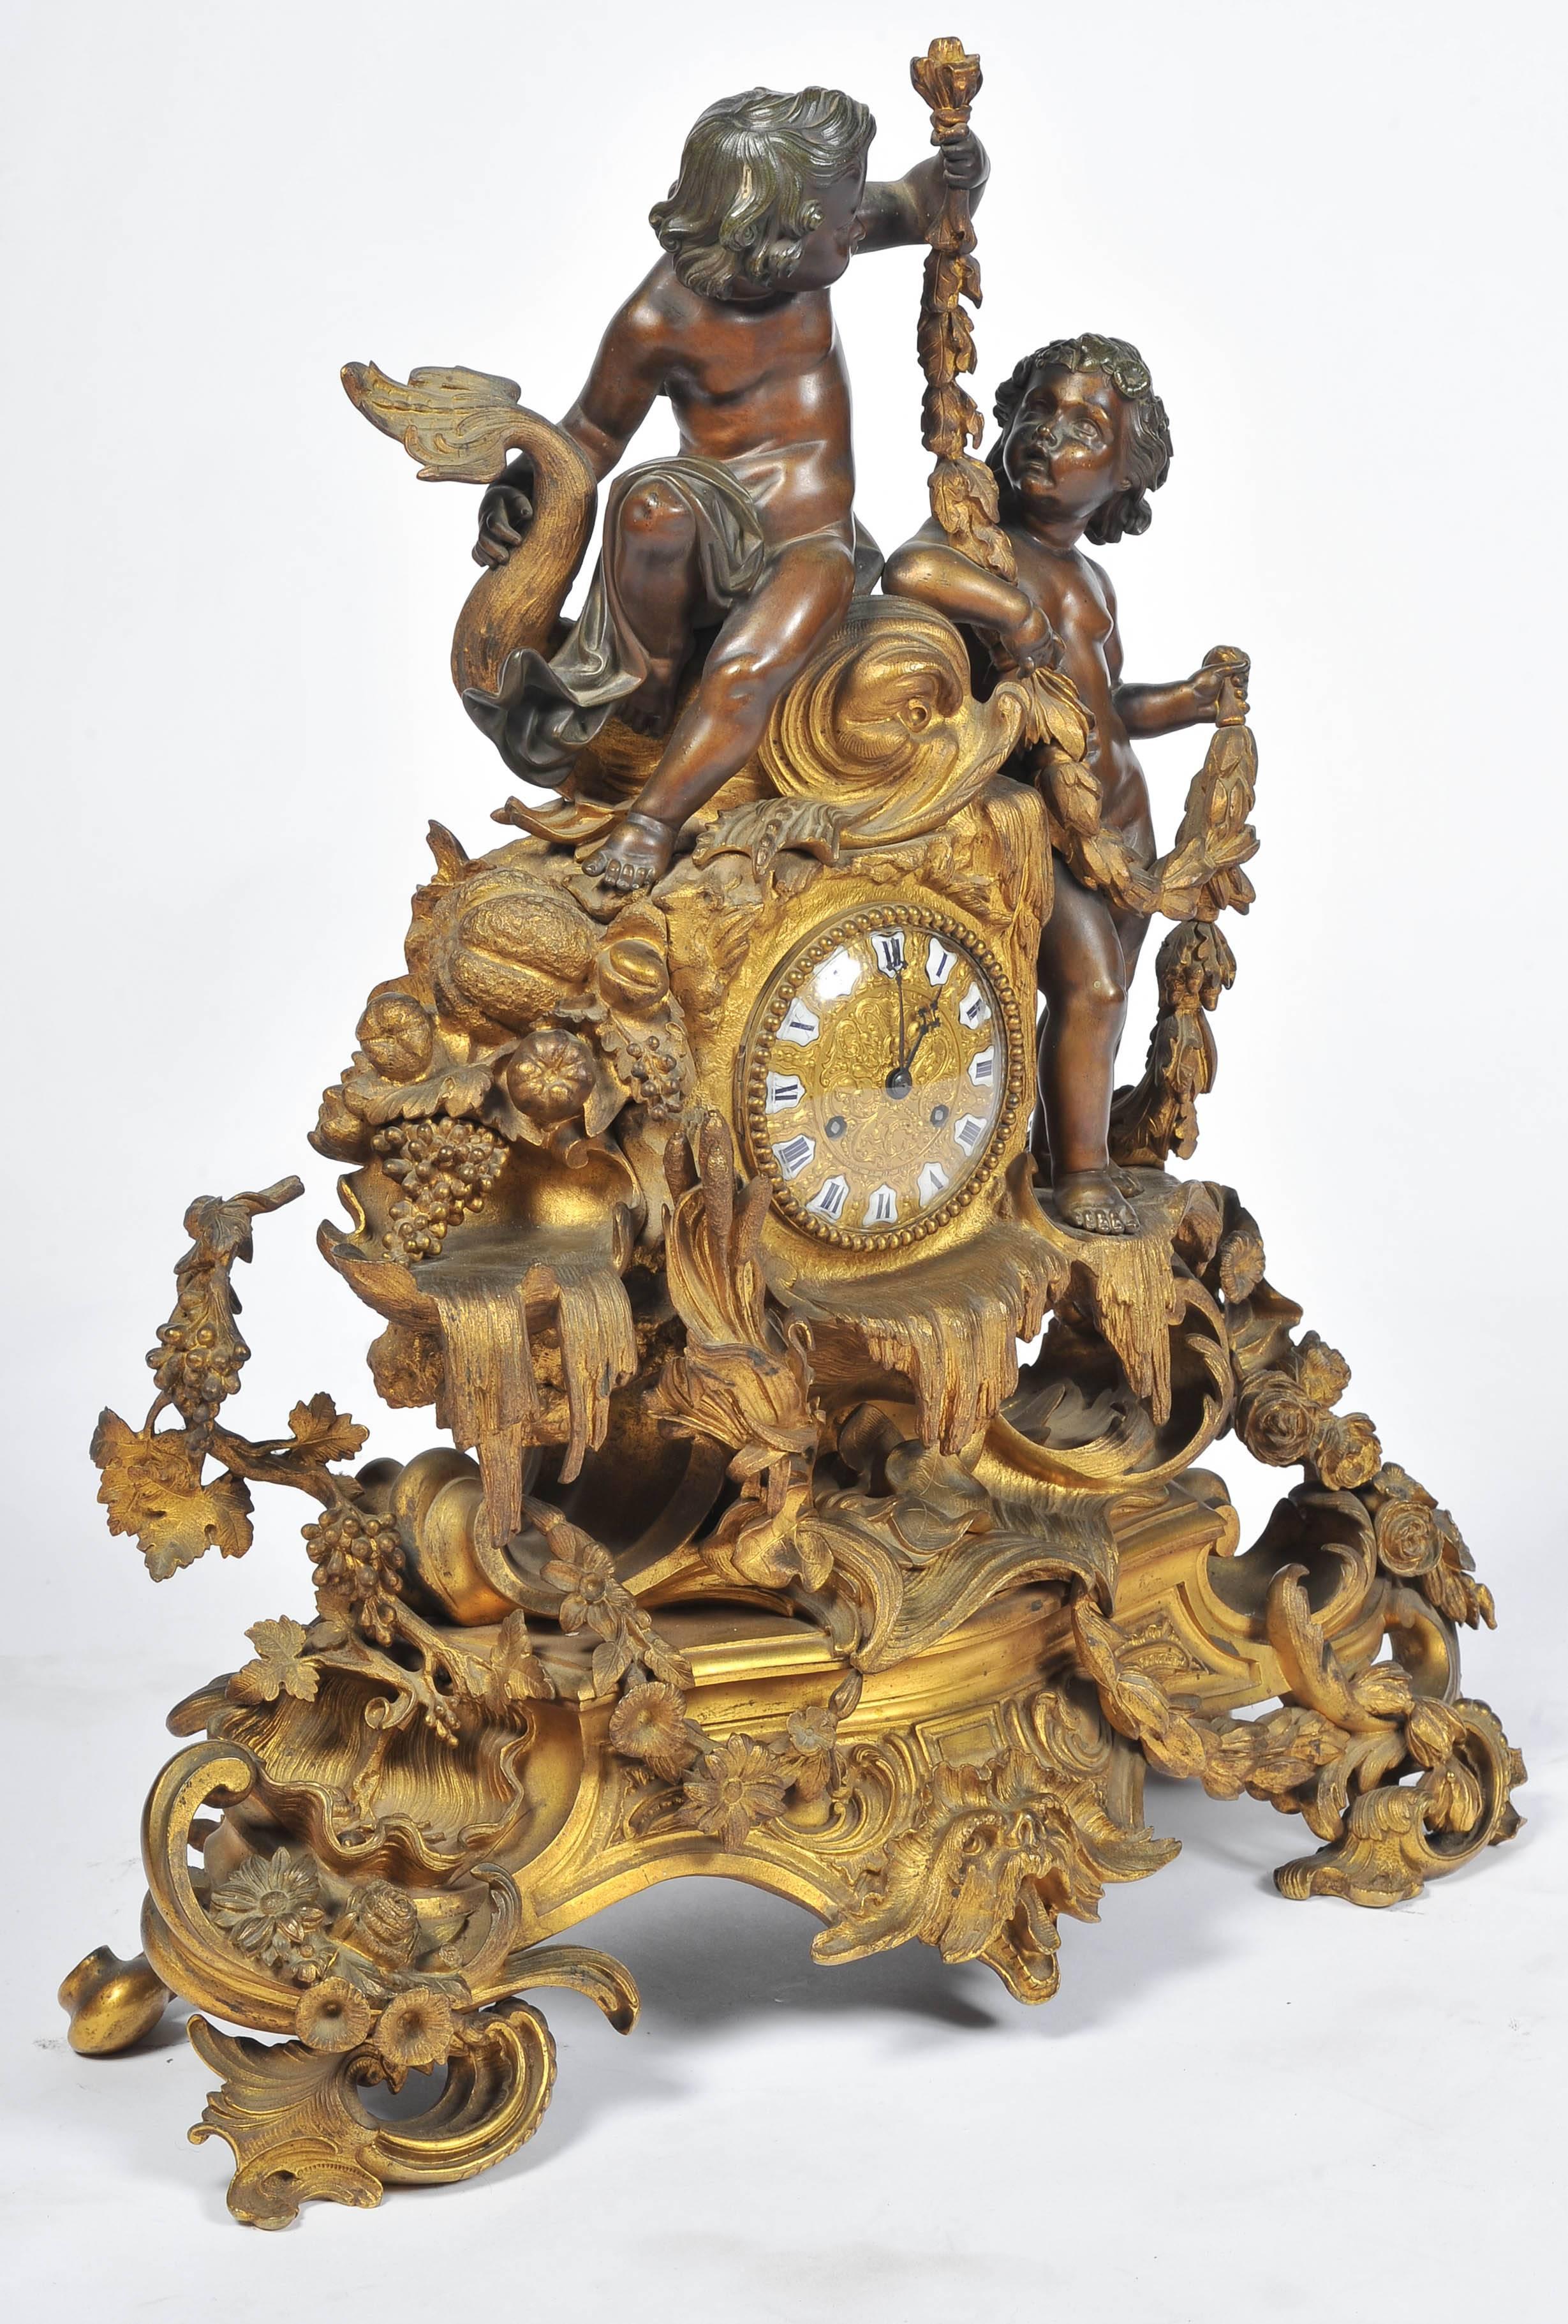 A very impressive 19th century French gilded ormolu clock. Having two putti with swags, drapes and foliage around the eight day chiming clock.